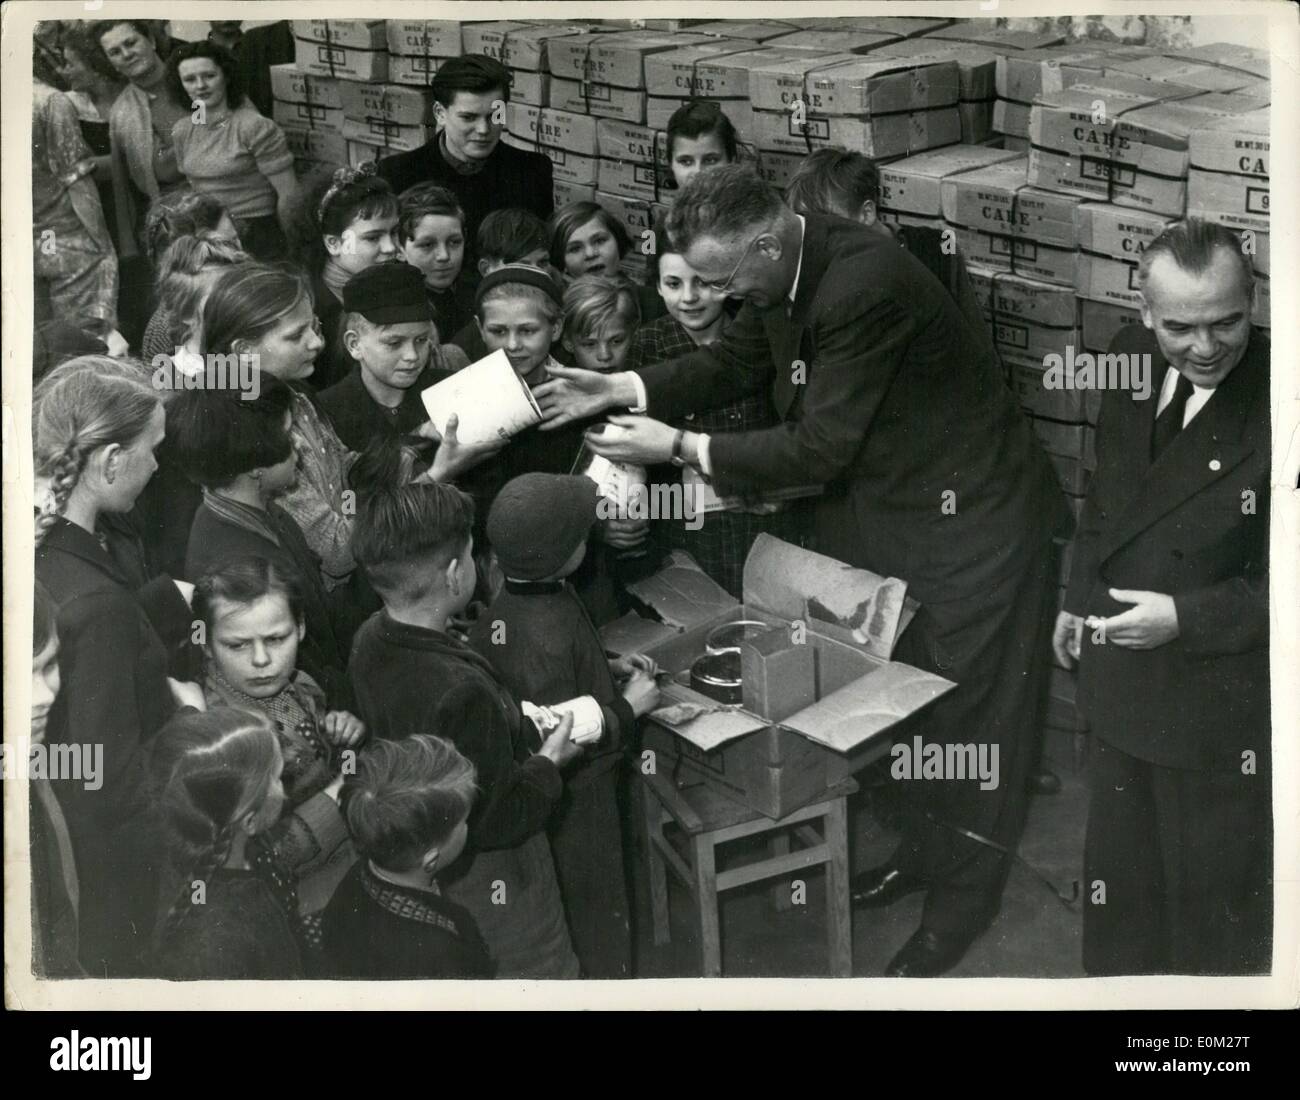 Mar. 03, 1953 - 'C.A.R.E.' Package Distributed to Refugee Children in Berlin. Keystone Photo Shows: The scene as Dr. Richard P. Stock Photo